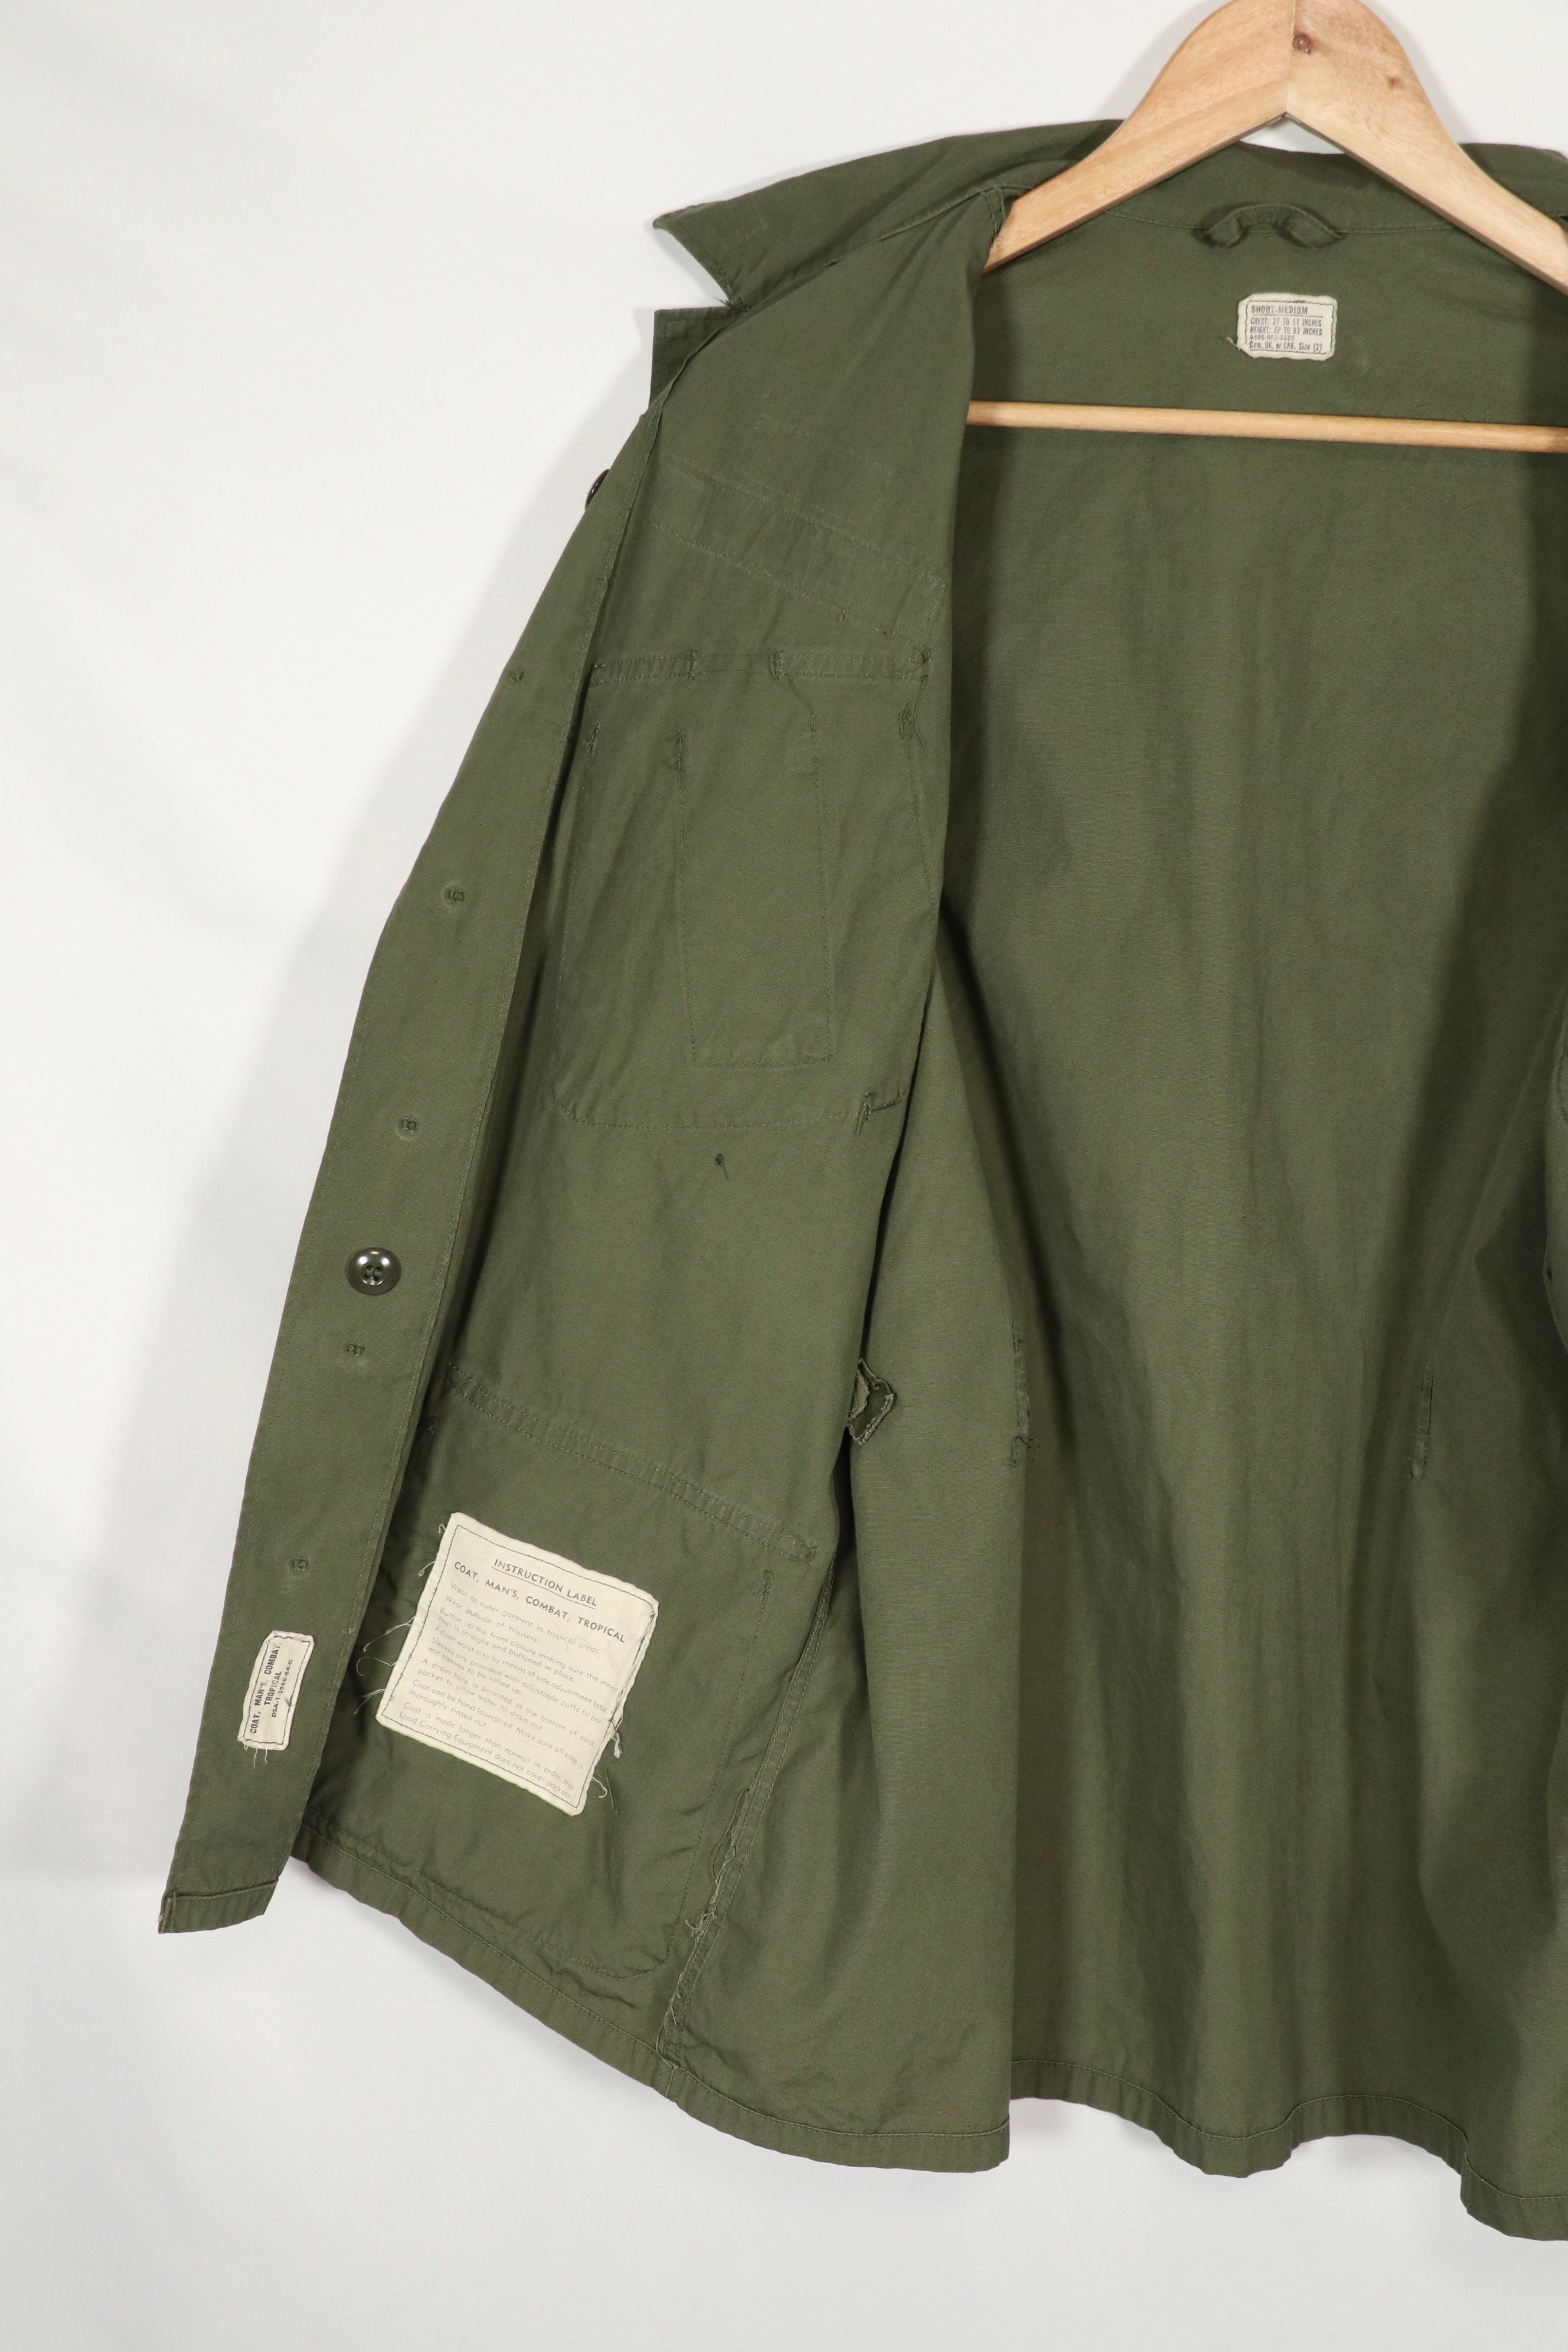 Real 1964 1st Model Jungle Fatigue Jacket in good condition M-L